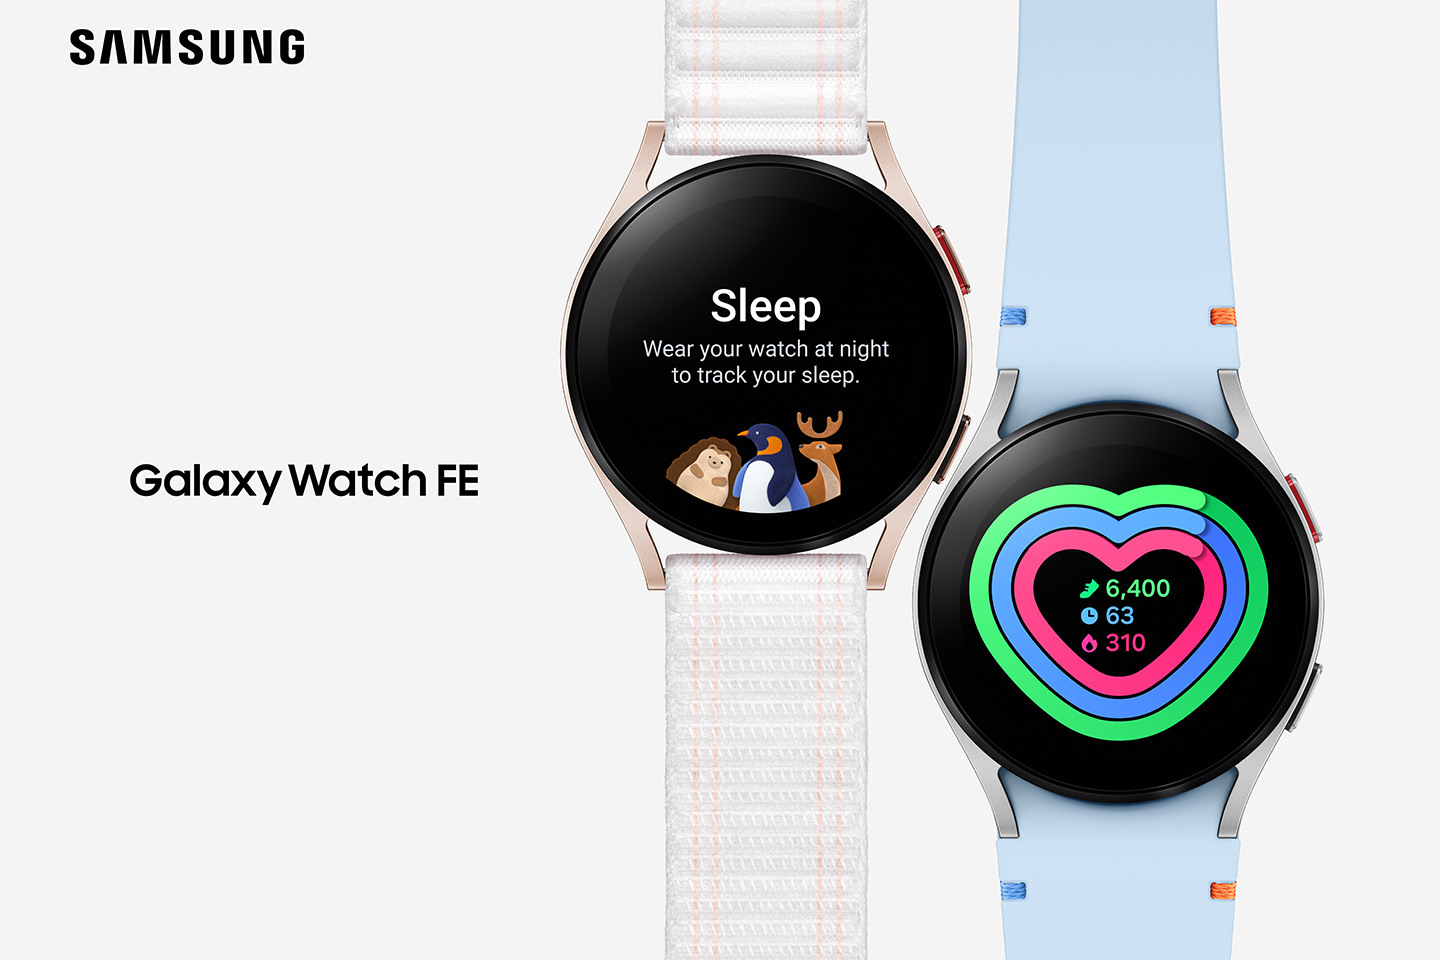 Samsung Galaxy Watch FE To Launch On 24 June